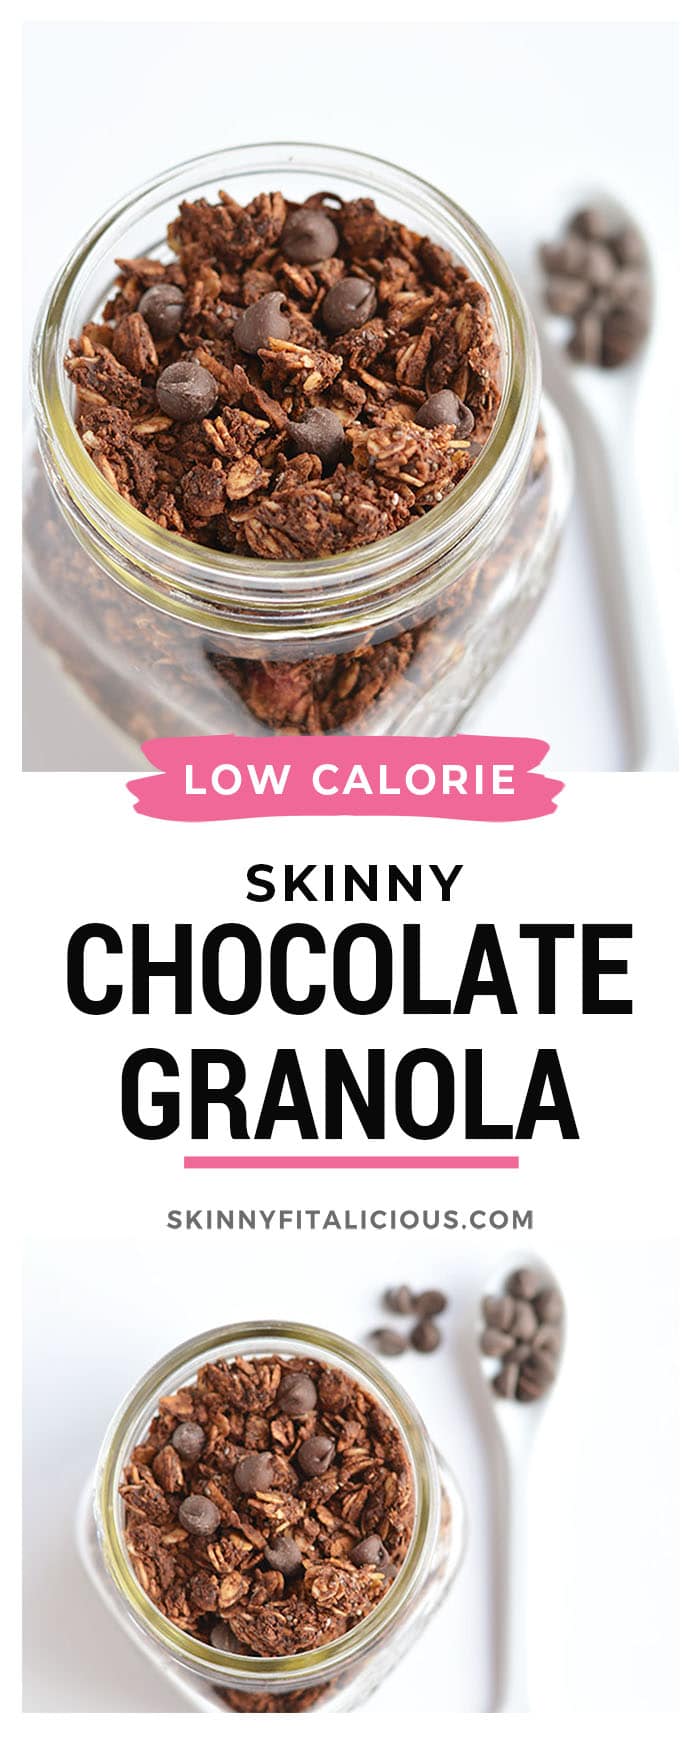 Skinny Chocolate Granola with chia seeds! A crunchy breakfast or snack to satisfy you when a chocolate craving hits! Gluten Free + Low Calorie + Vegan